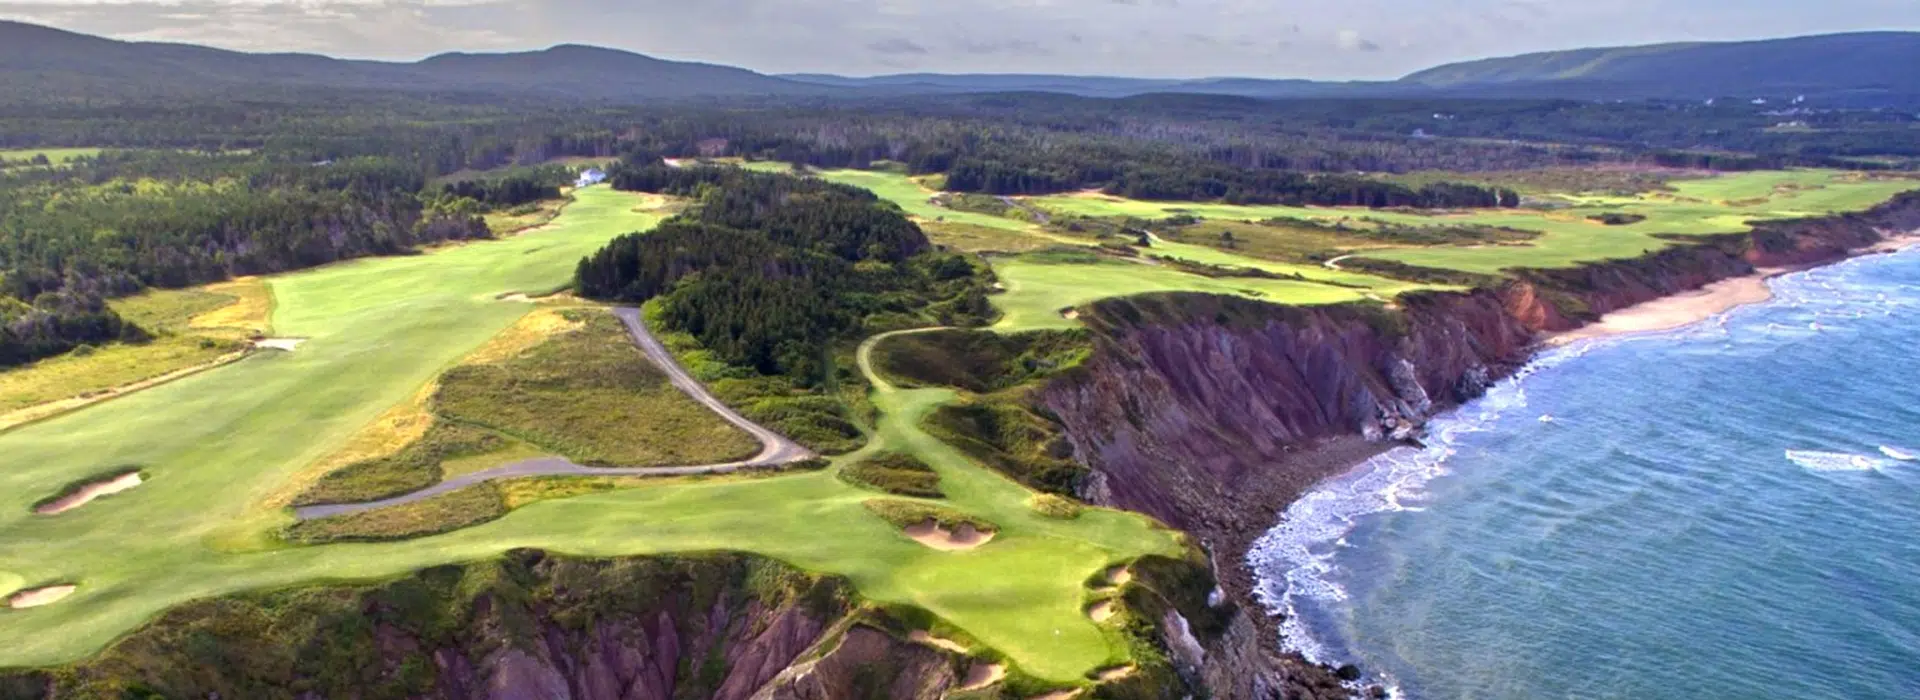 Cabot Cliffs ranked first in list of top golf courses in country